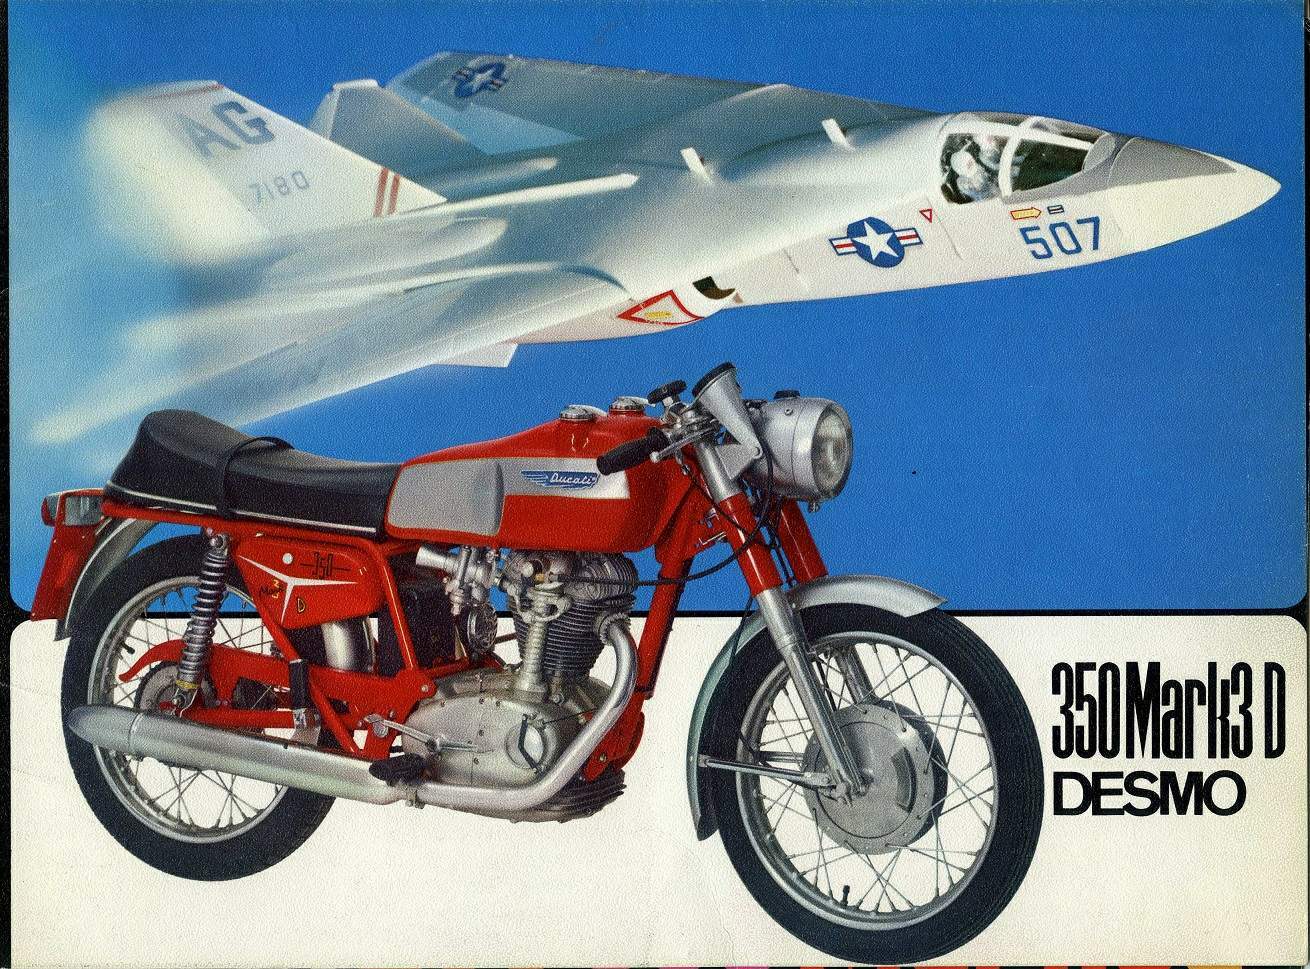 Ducati 350 Mark 3 D technical specifications